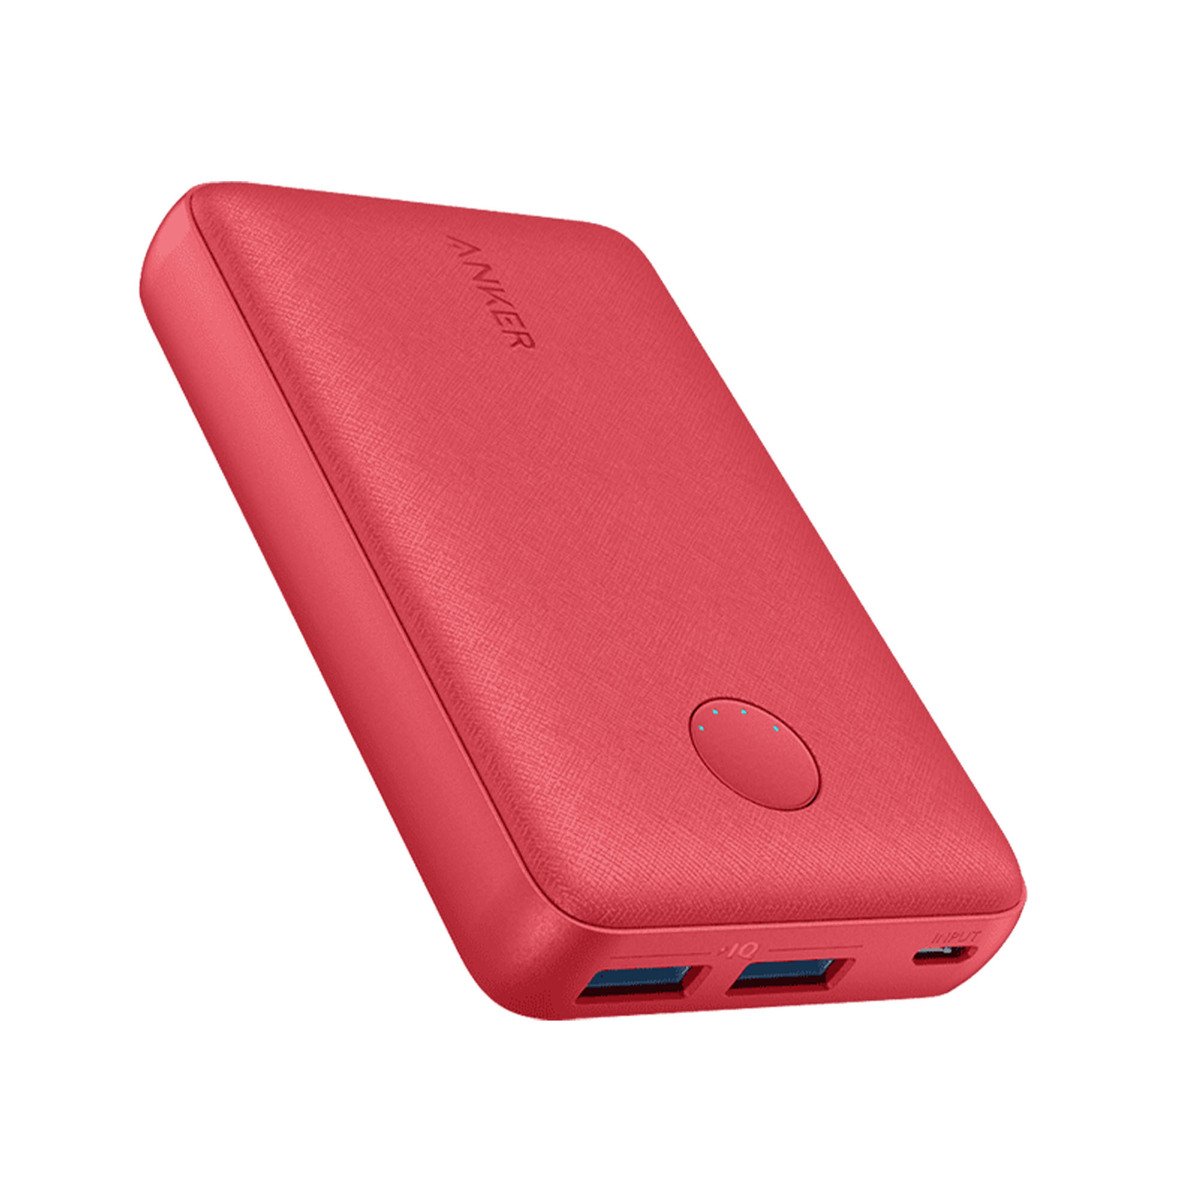 Anker Power Bank 10000 mAh A1223H91 Red